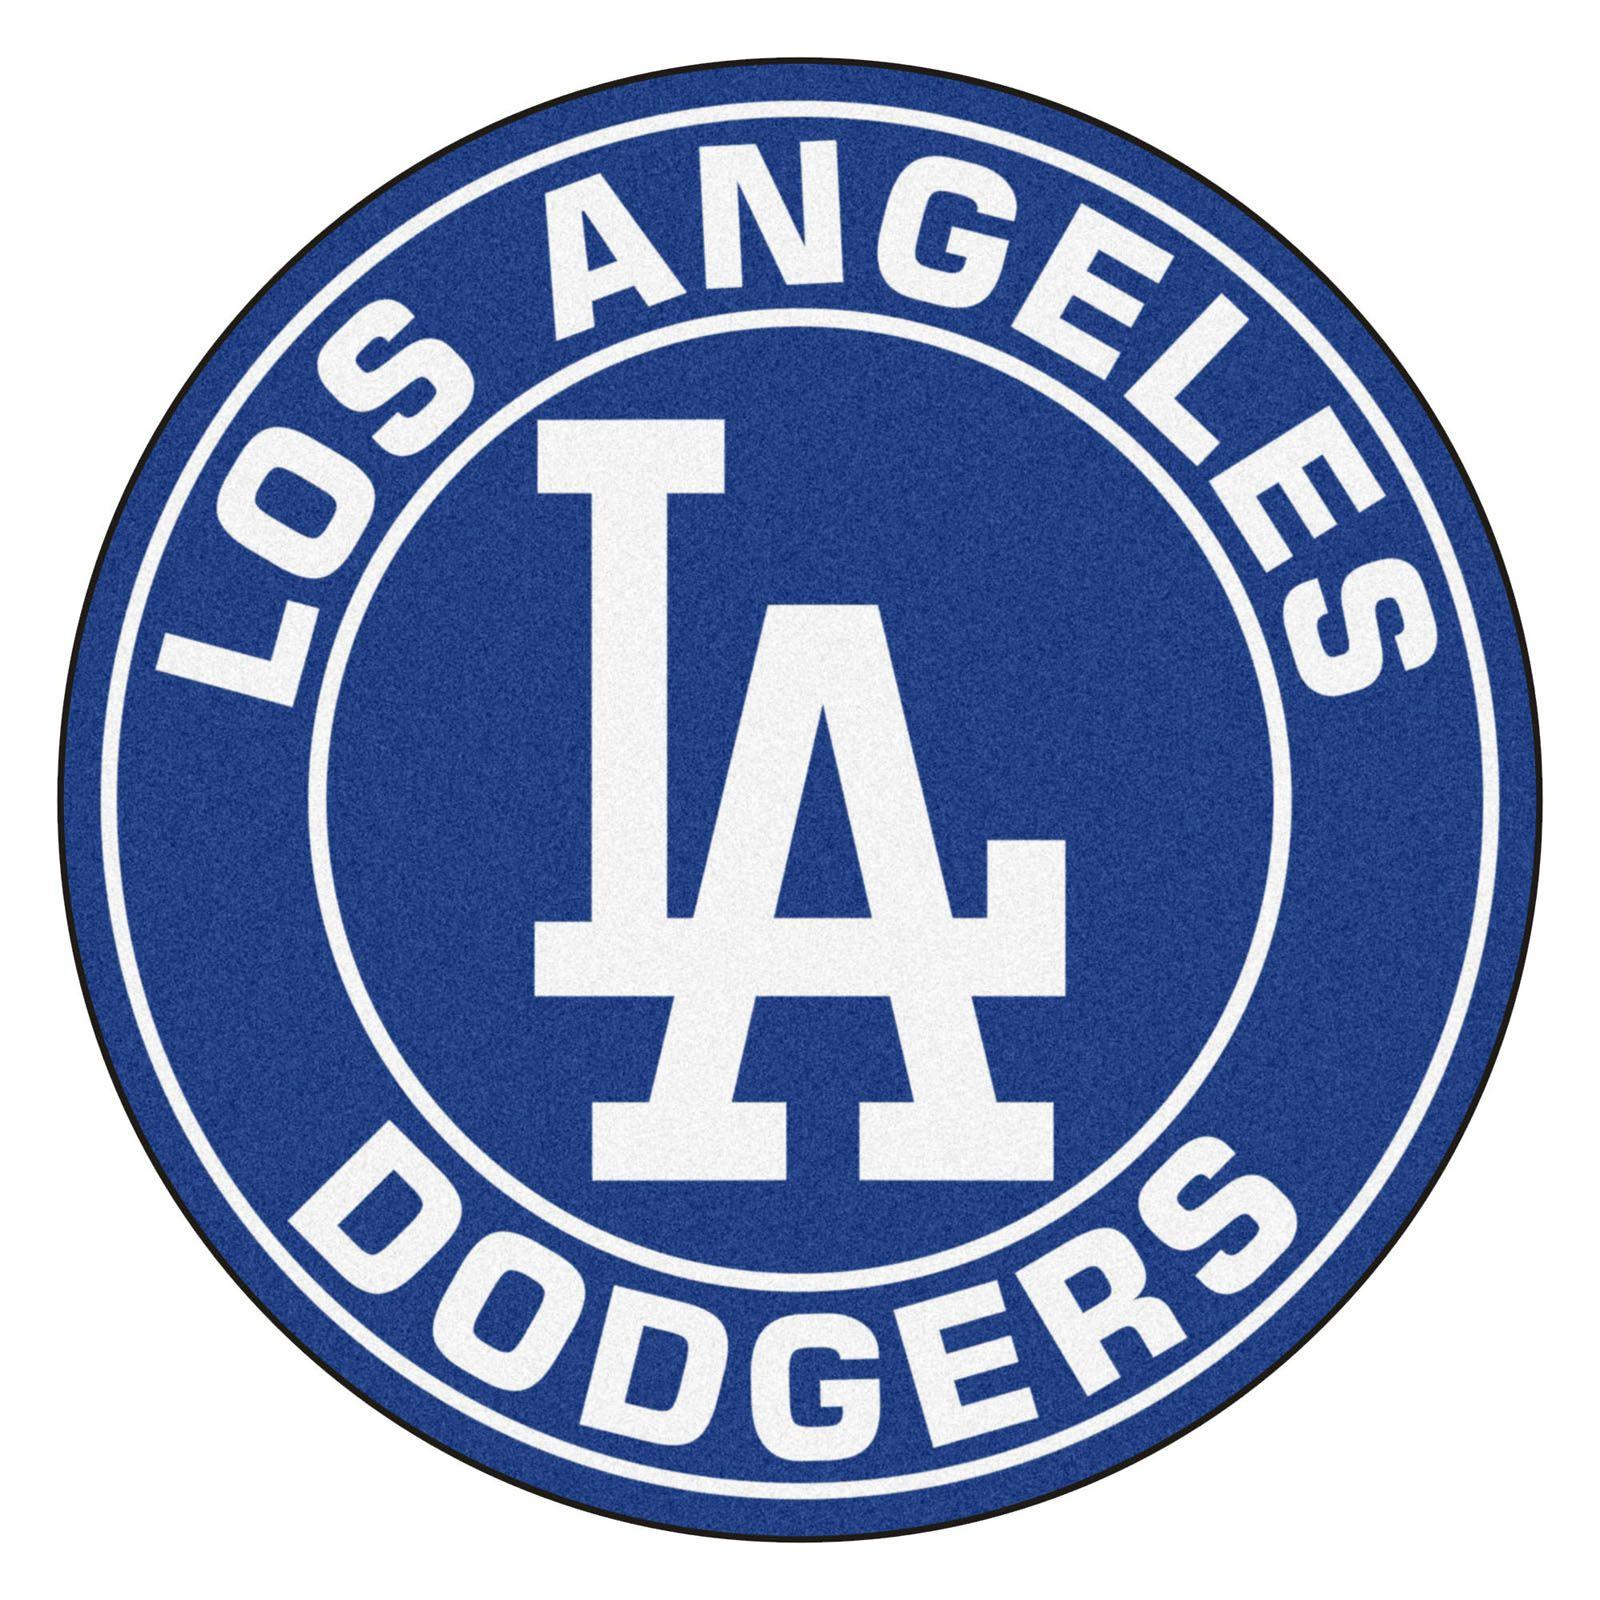 Los Angeles Logo - Los Angeles Logo, Los Angeles Symbol Meaning, History and Evolution